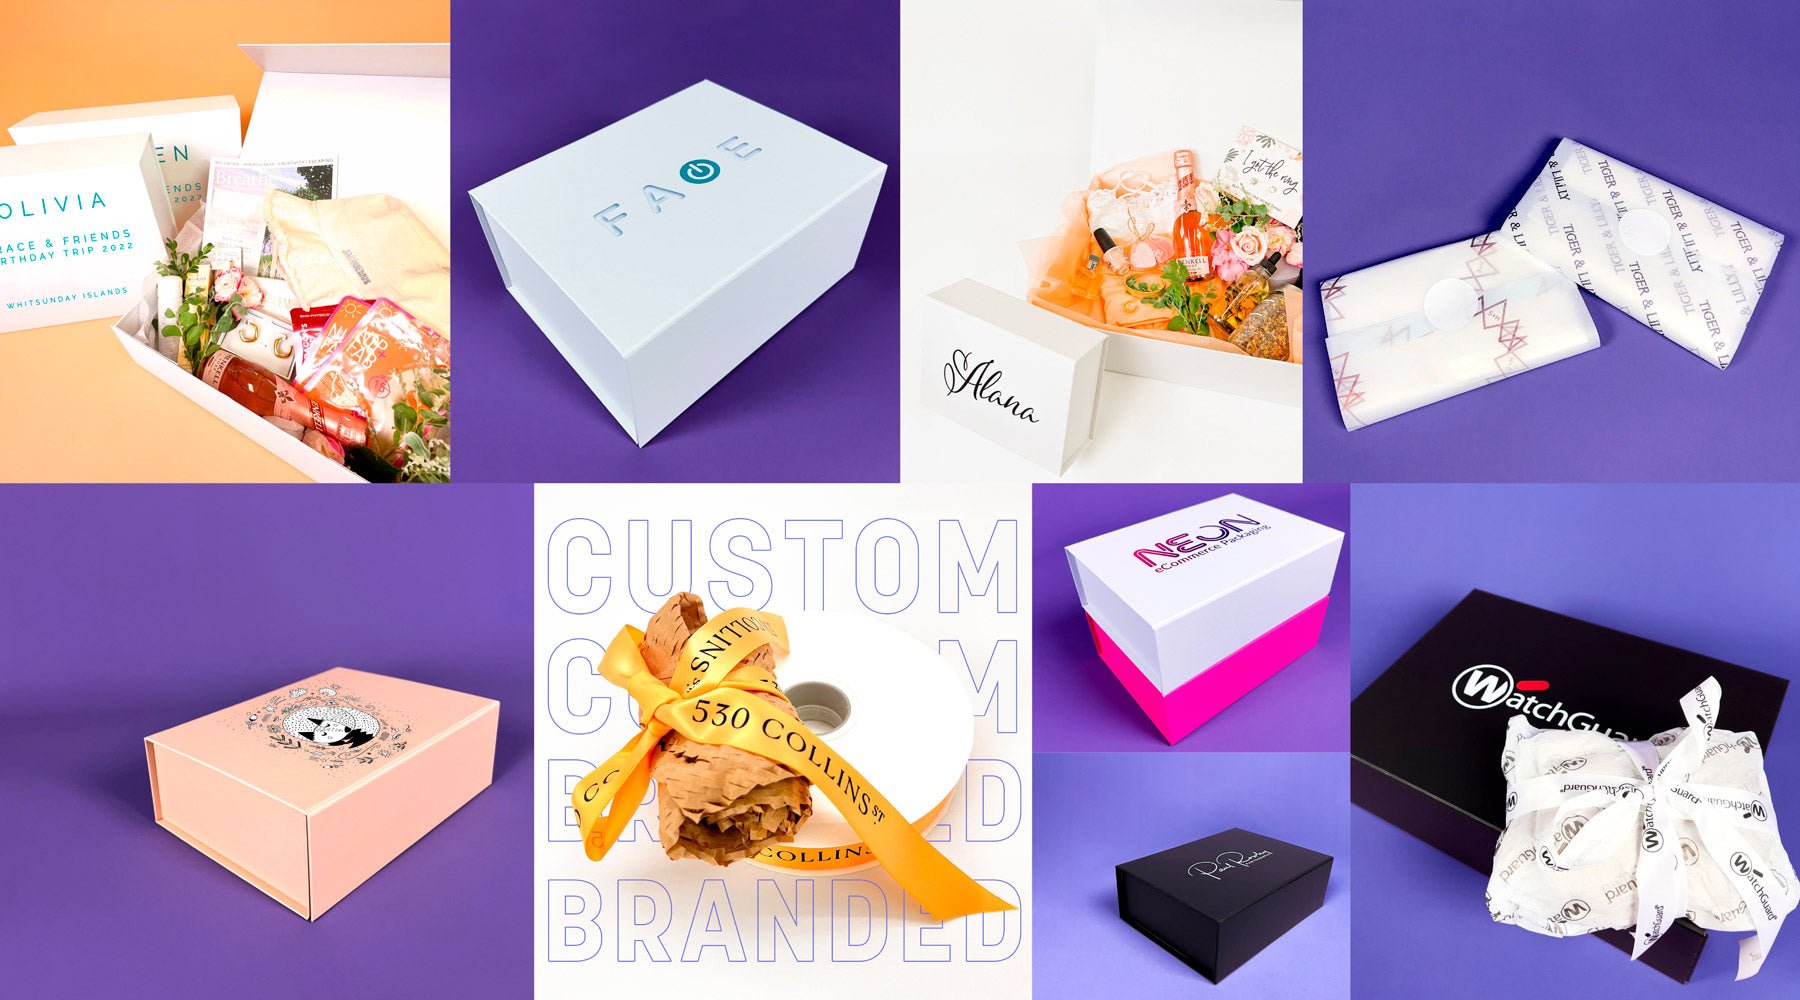 What are the benefits of custom packaging? Find out how custom printed packaging makes a big difference to brands. - NEON eCommerce Packaging